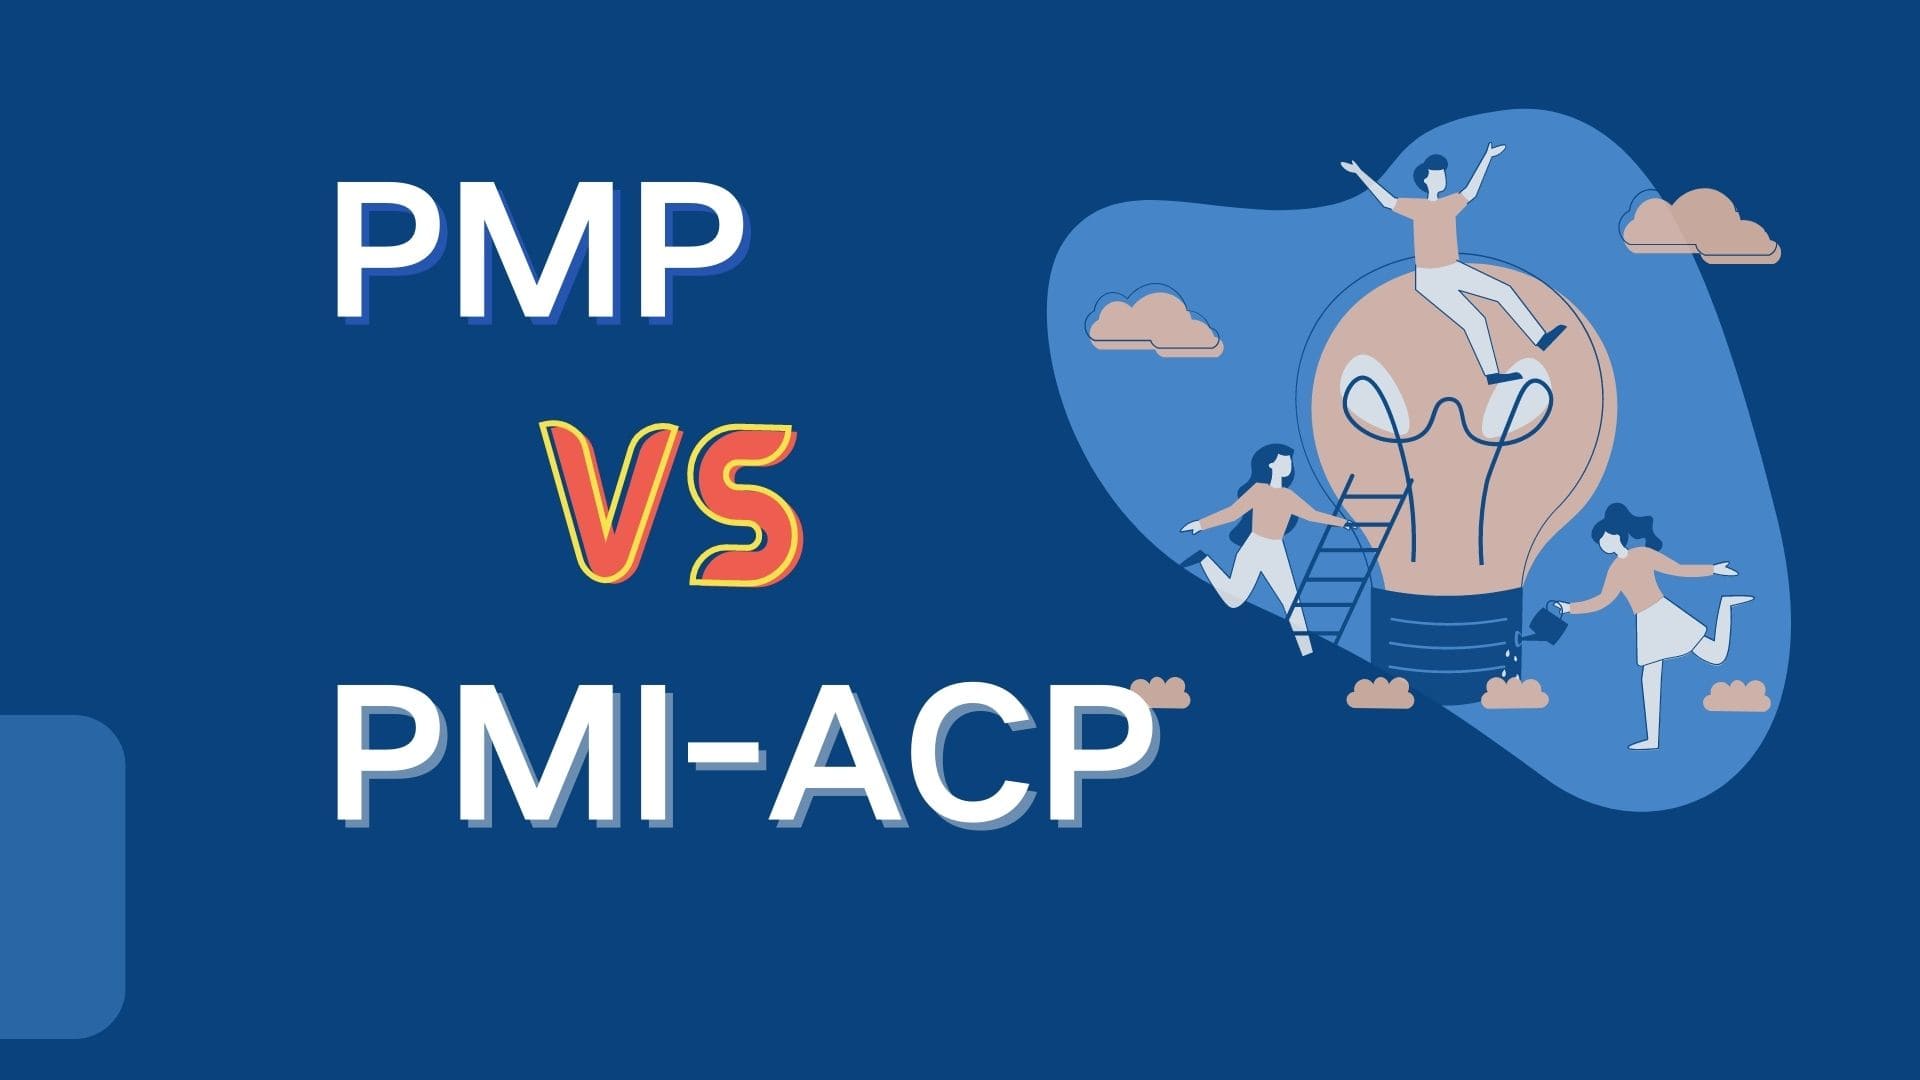 How to prepare for PMP and PMI-ACP certification exams